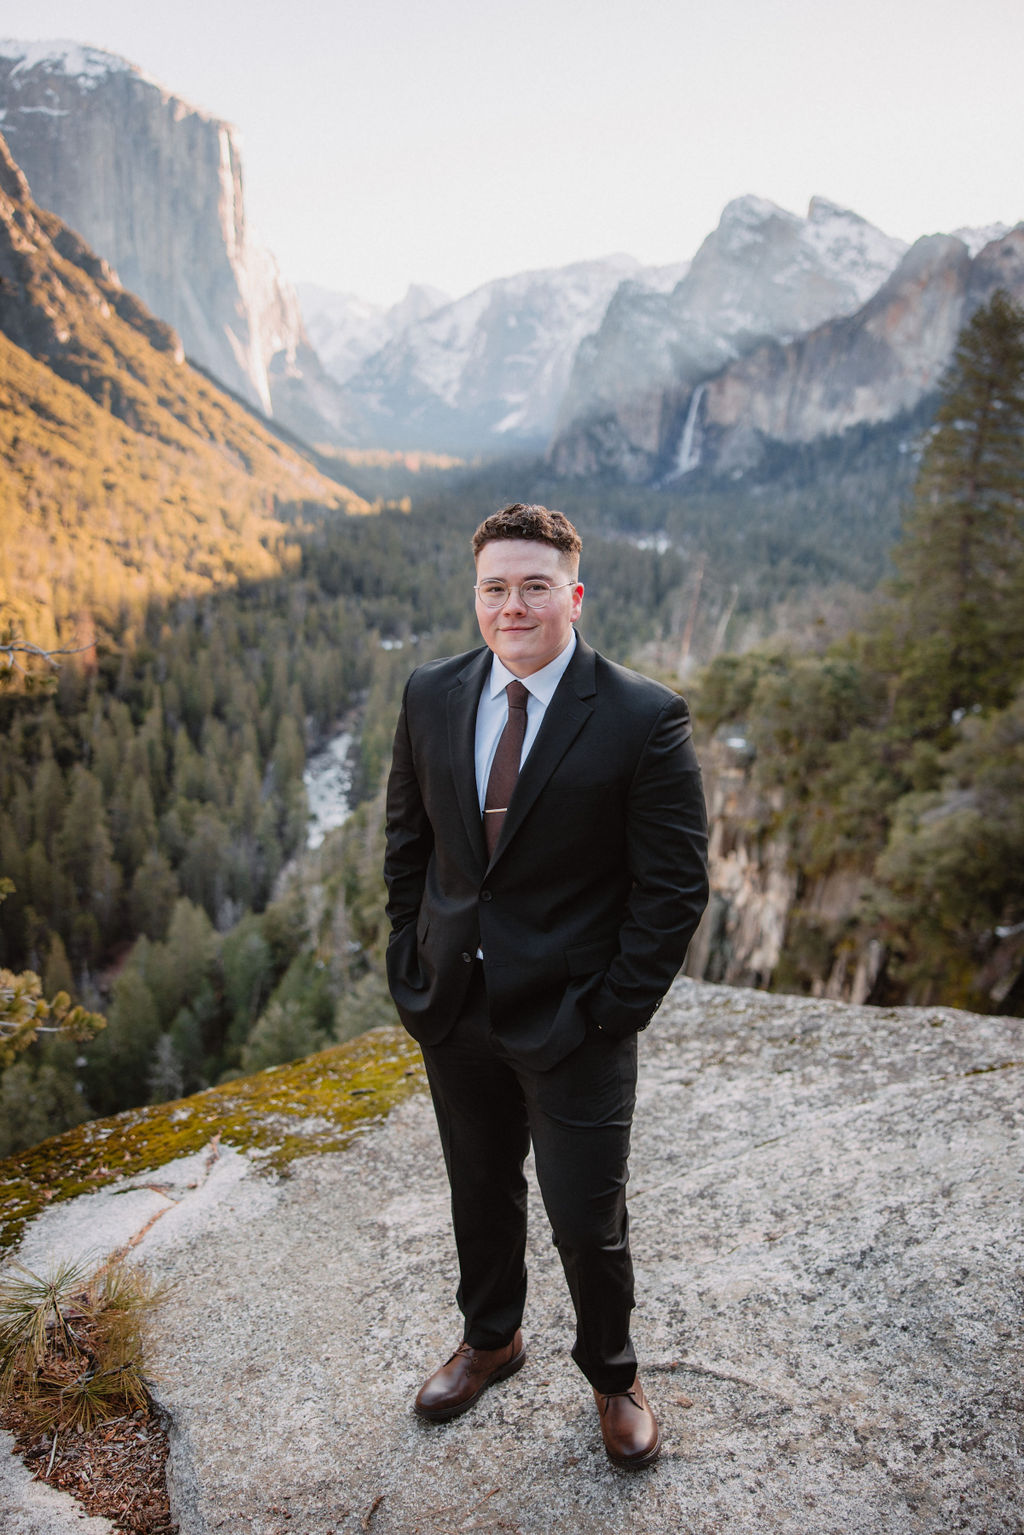 A groom in formal attire standing on a rocky overlook with a scenic mountainous background.